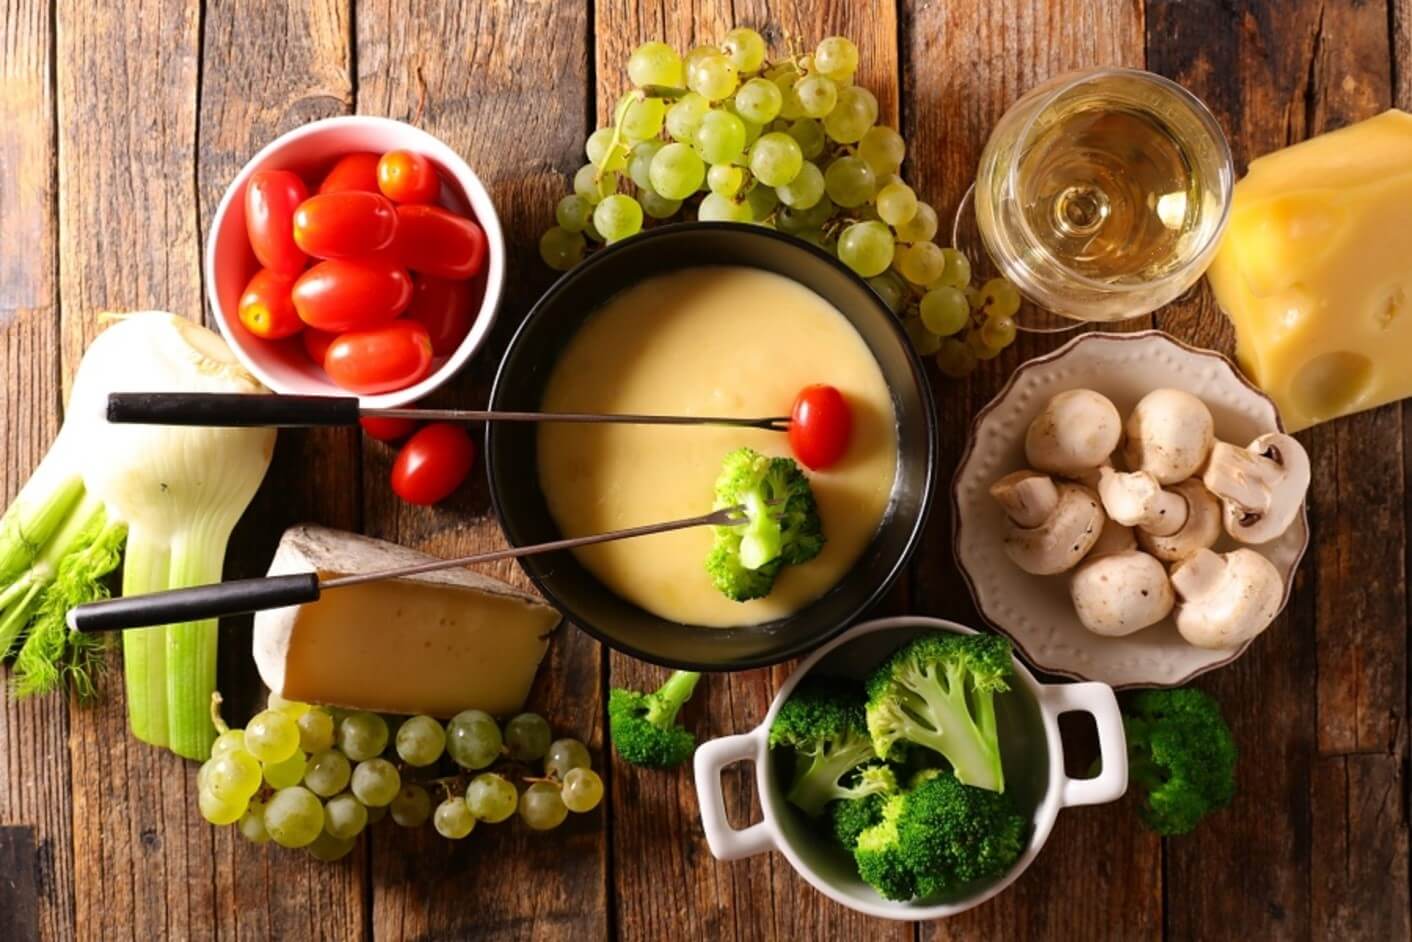 fondue pot with grapes and veggies